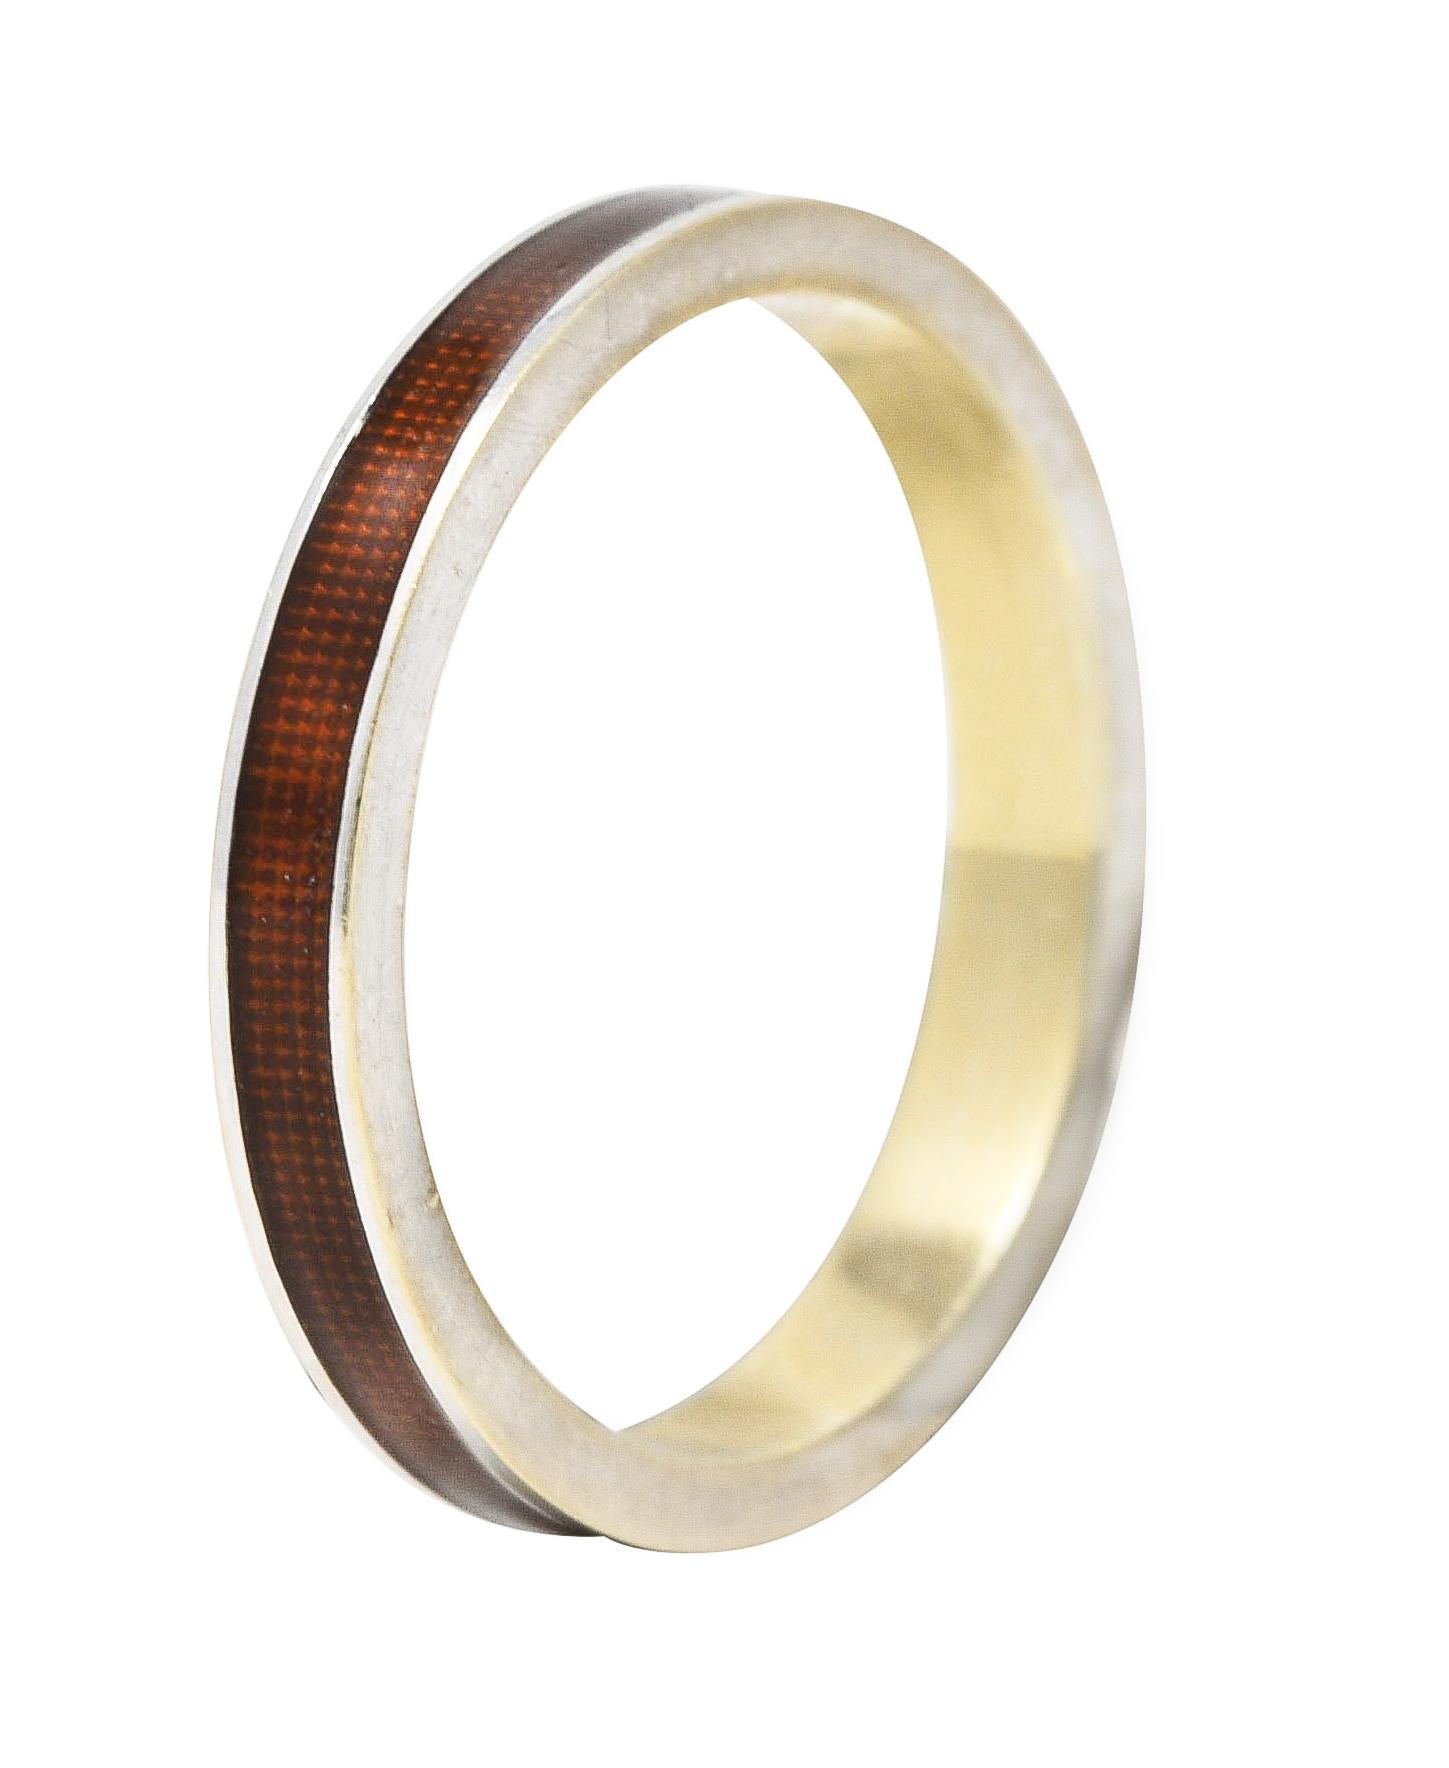 Band ring features a recessed guilloche enamel channel fully around. Transparent medium brown in color - glossed over engraved grid pattern. With high polished white gold surround. Tested as 18 karat gold. Attributed to Hidalgo. Circa: 1990's. Ring